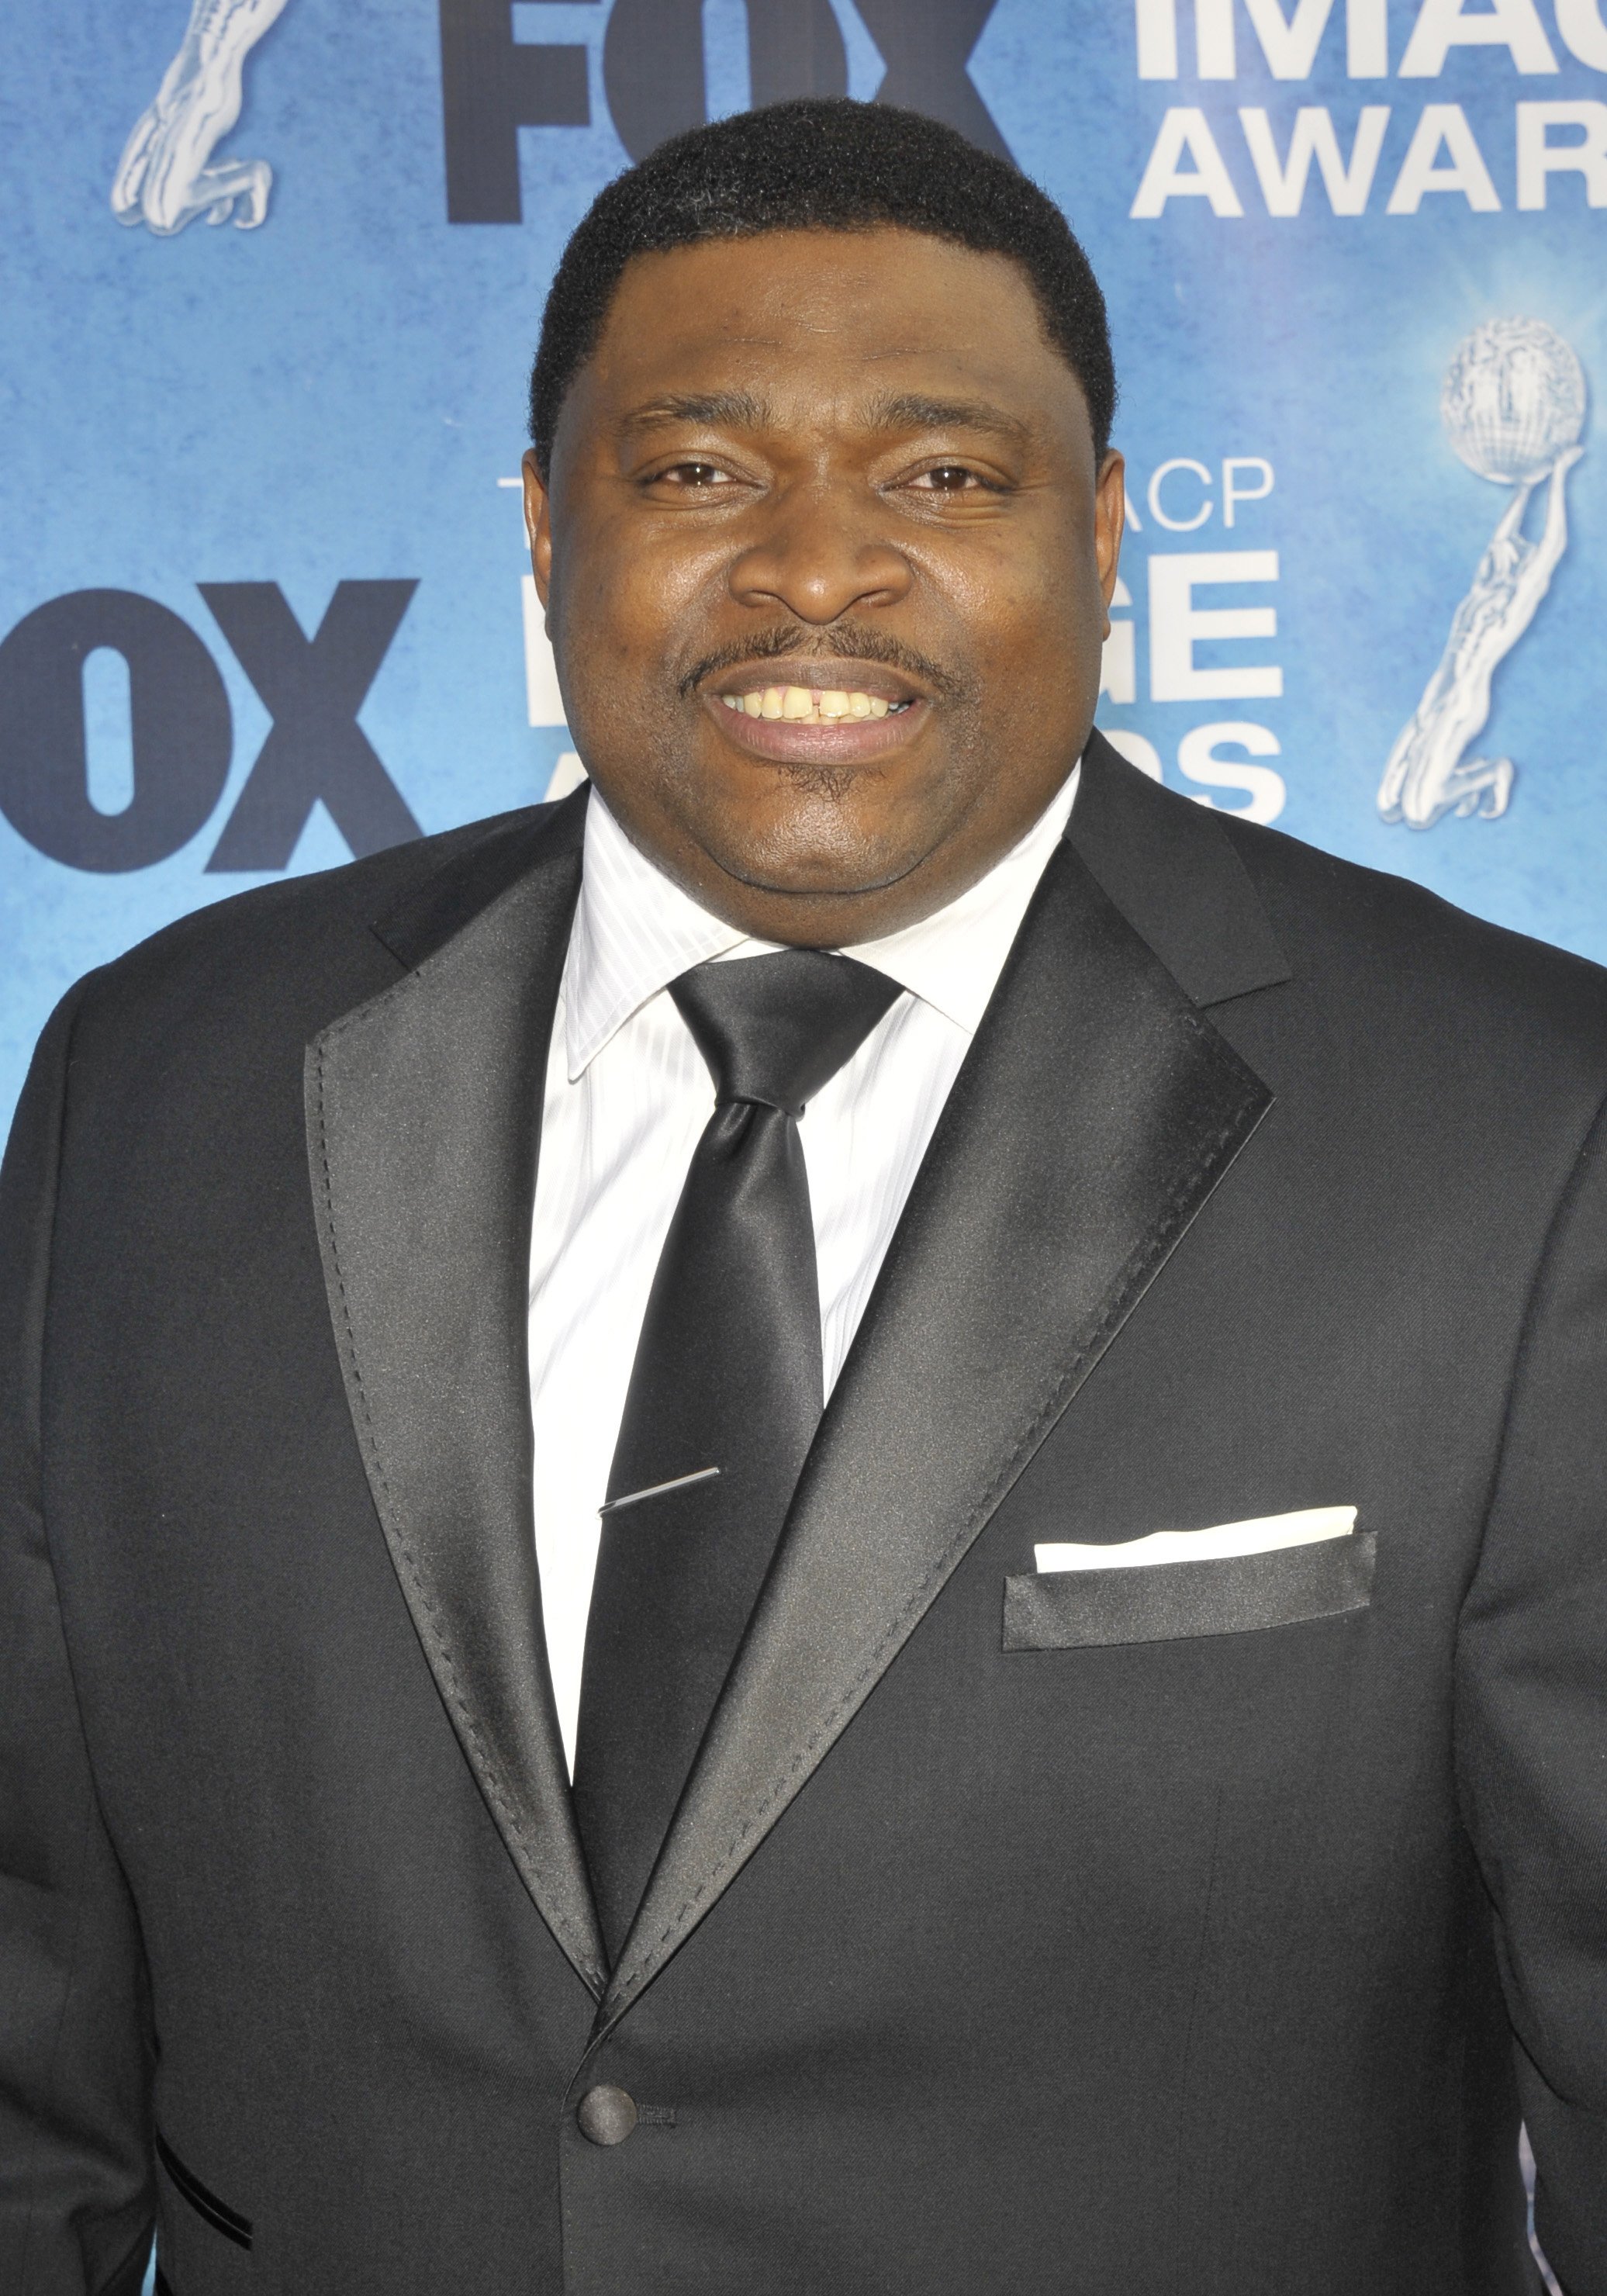 LaVan Davis on March 4, 2011 in Los Angeles, California | Photo: Getty Images